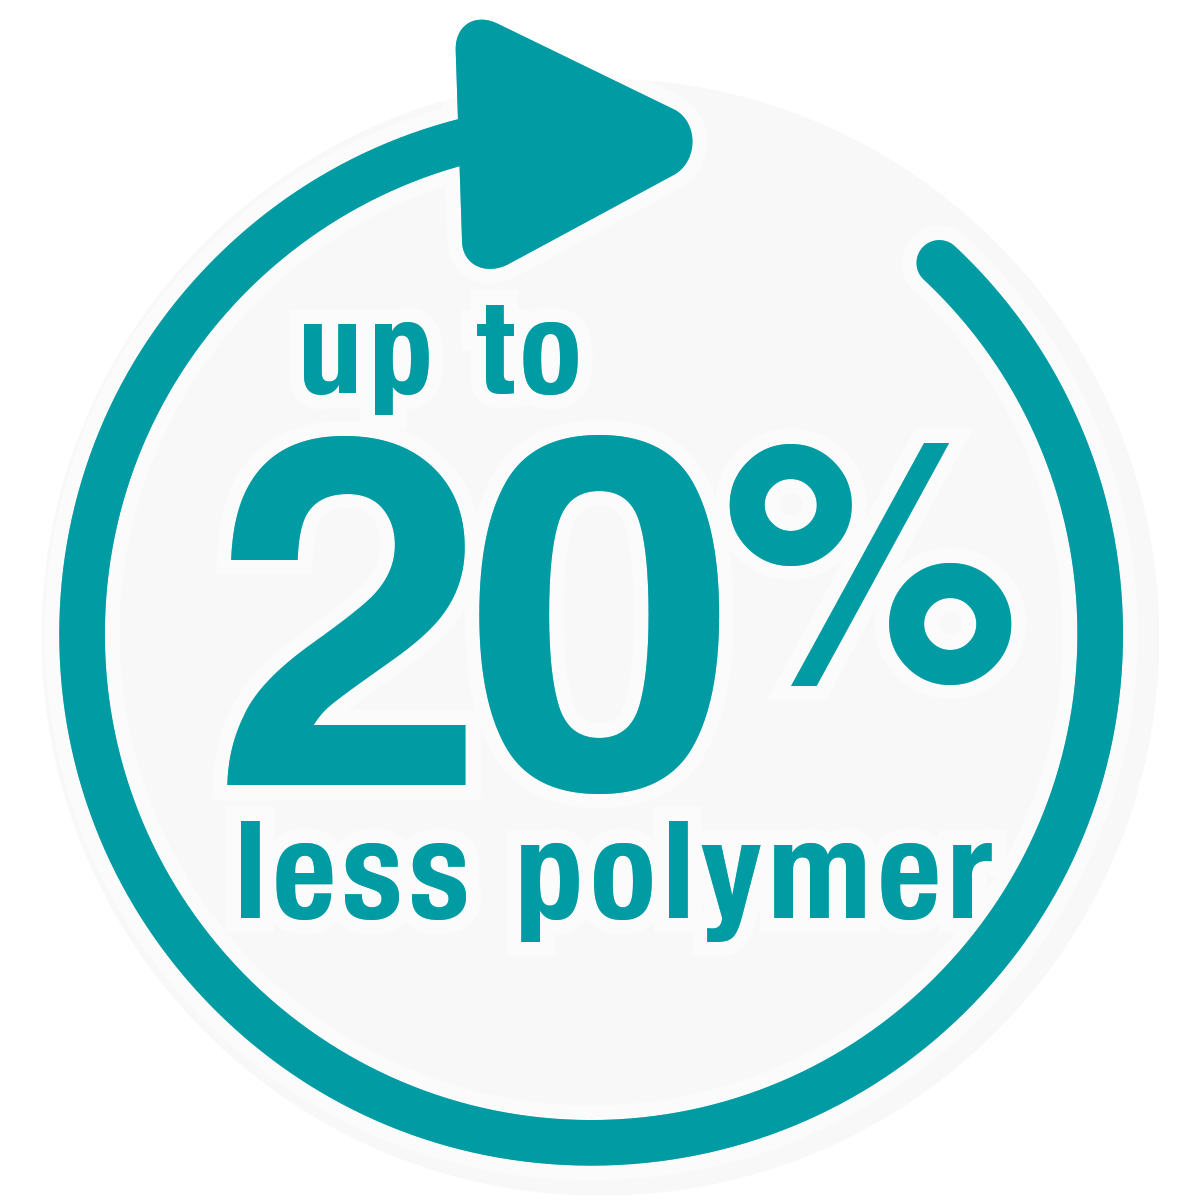 Up to 20% less polymer flass